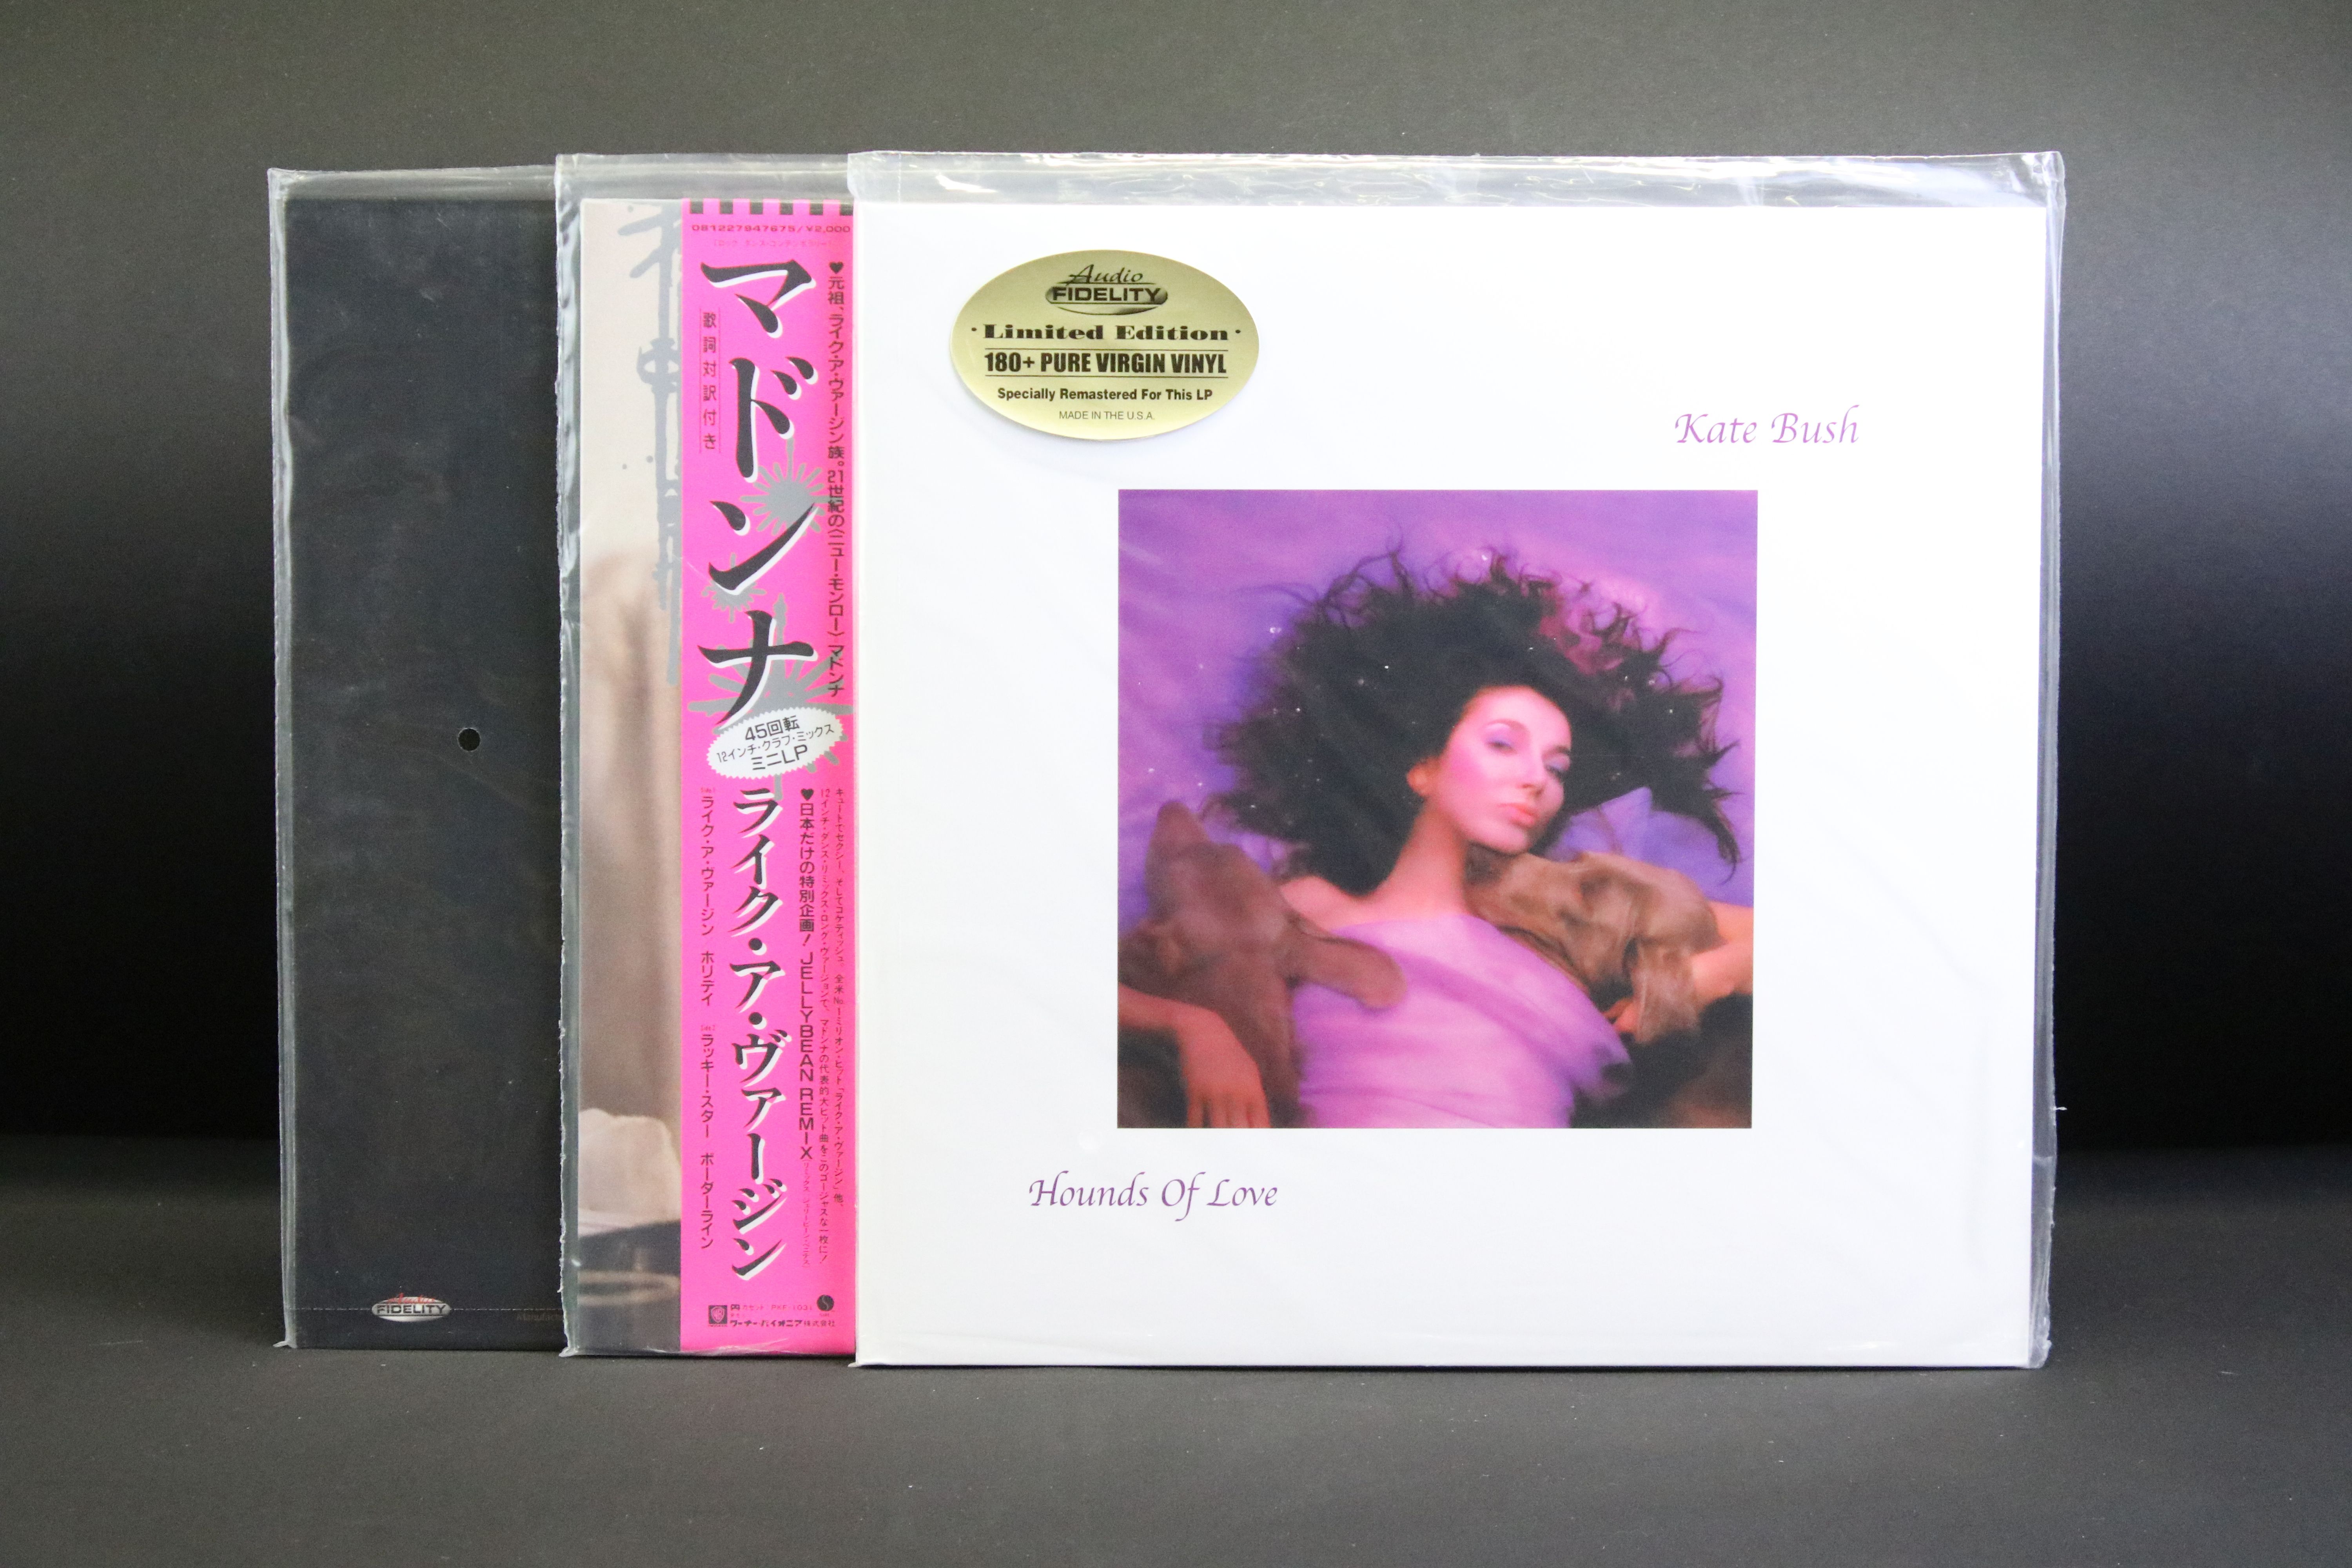 Vinyl - 3 sealed reissue LPs to include Kate Bush Hounds Of Love (AFZLP 087) Audio Fidelity ltd